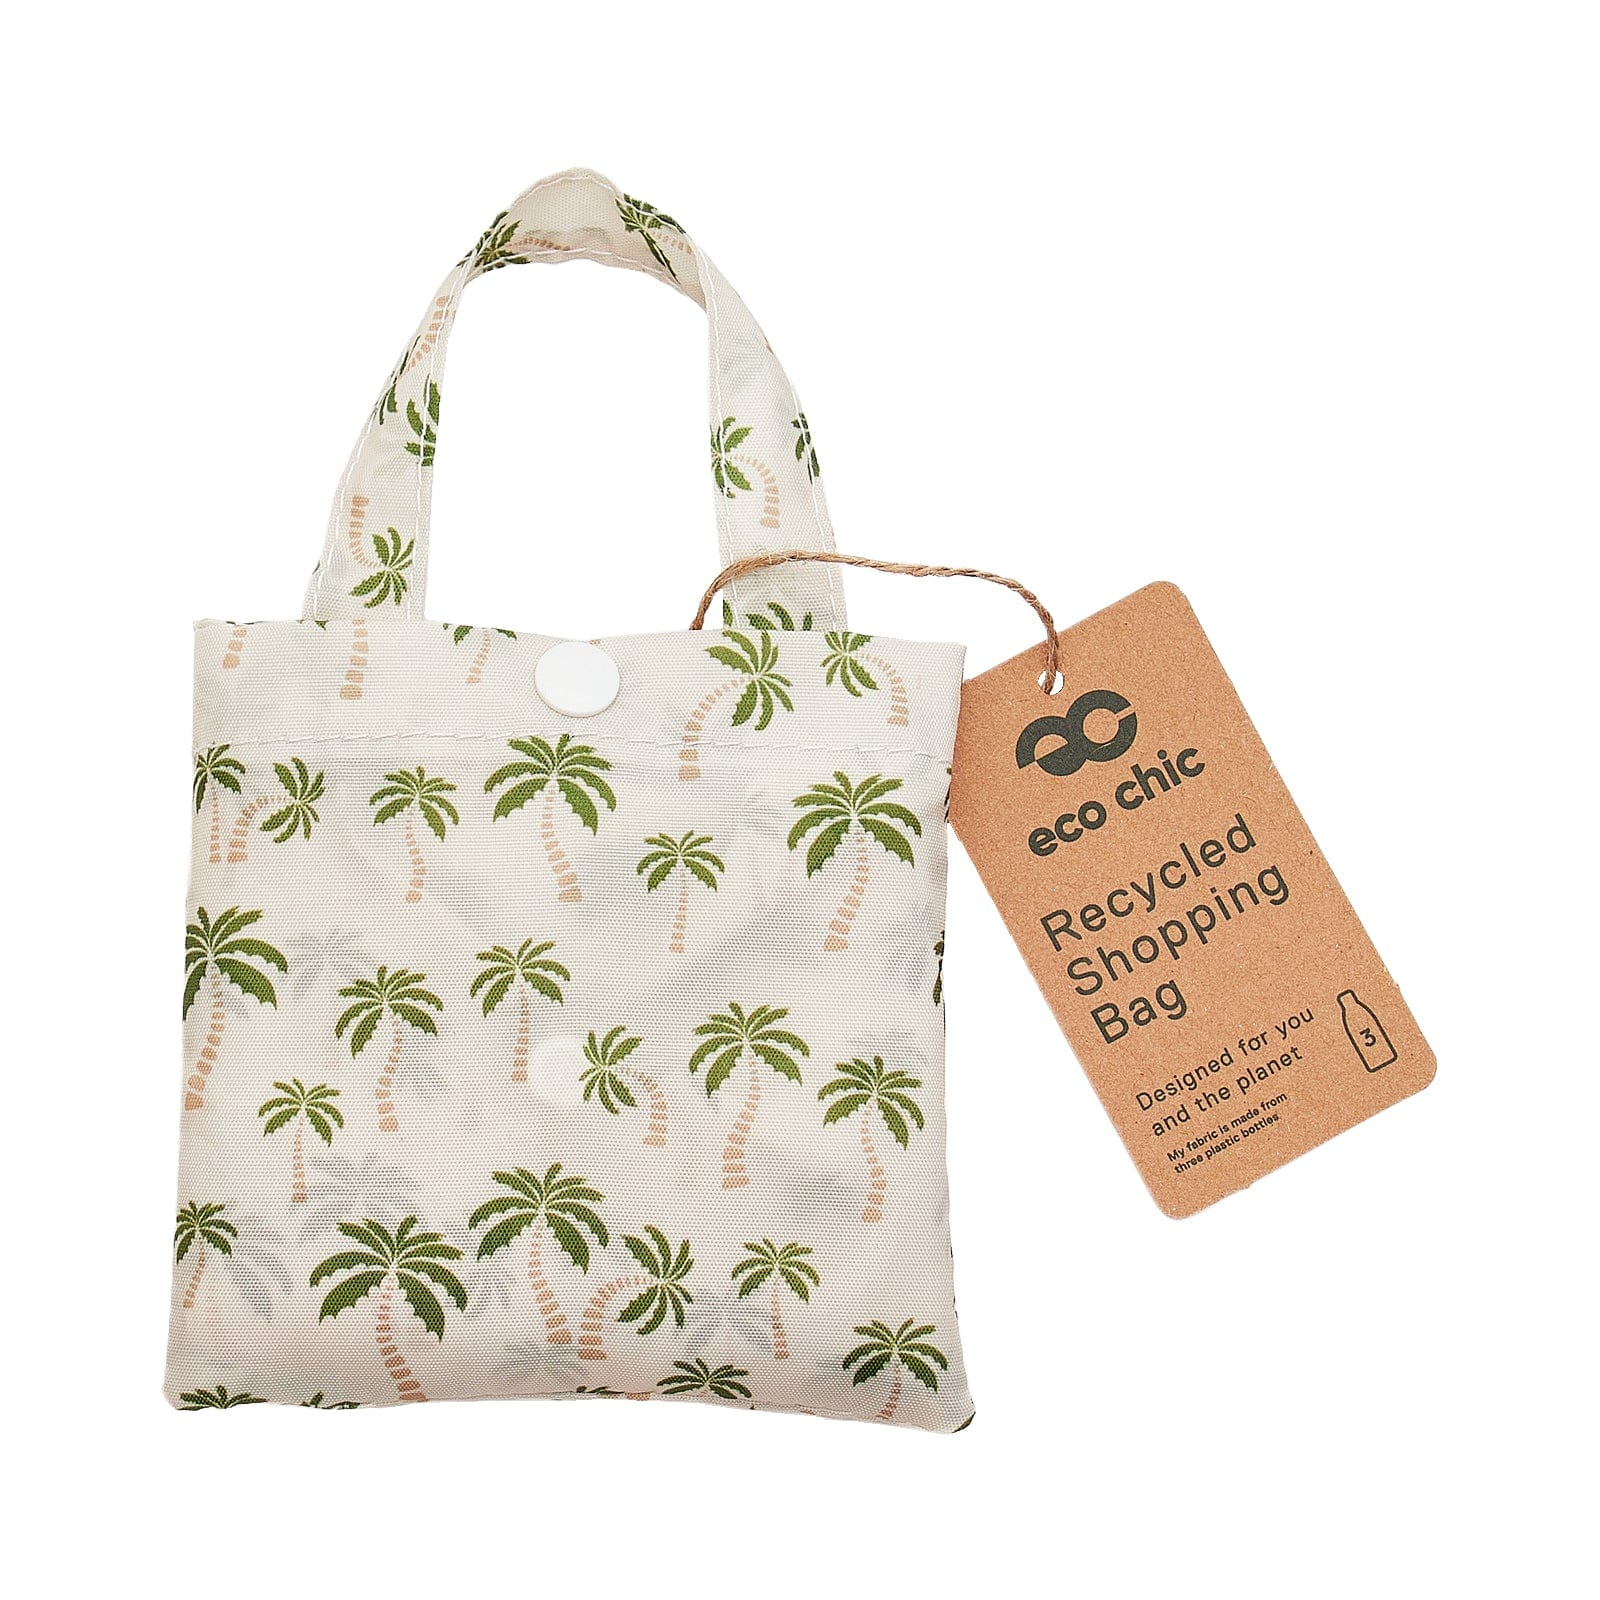 Eco Chic Beige Eco Chic Lightweight Foldable Reusable Shopping Bag Palm Tree